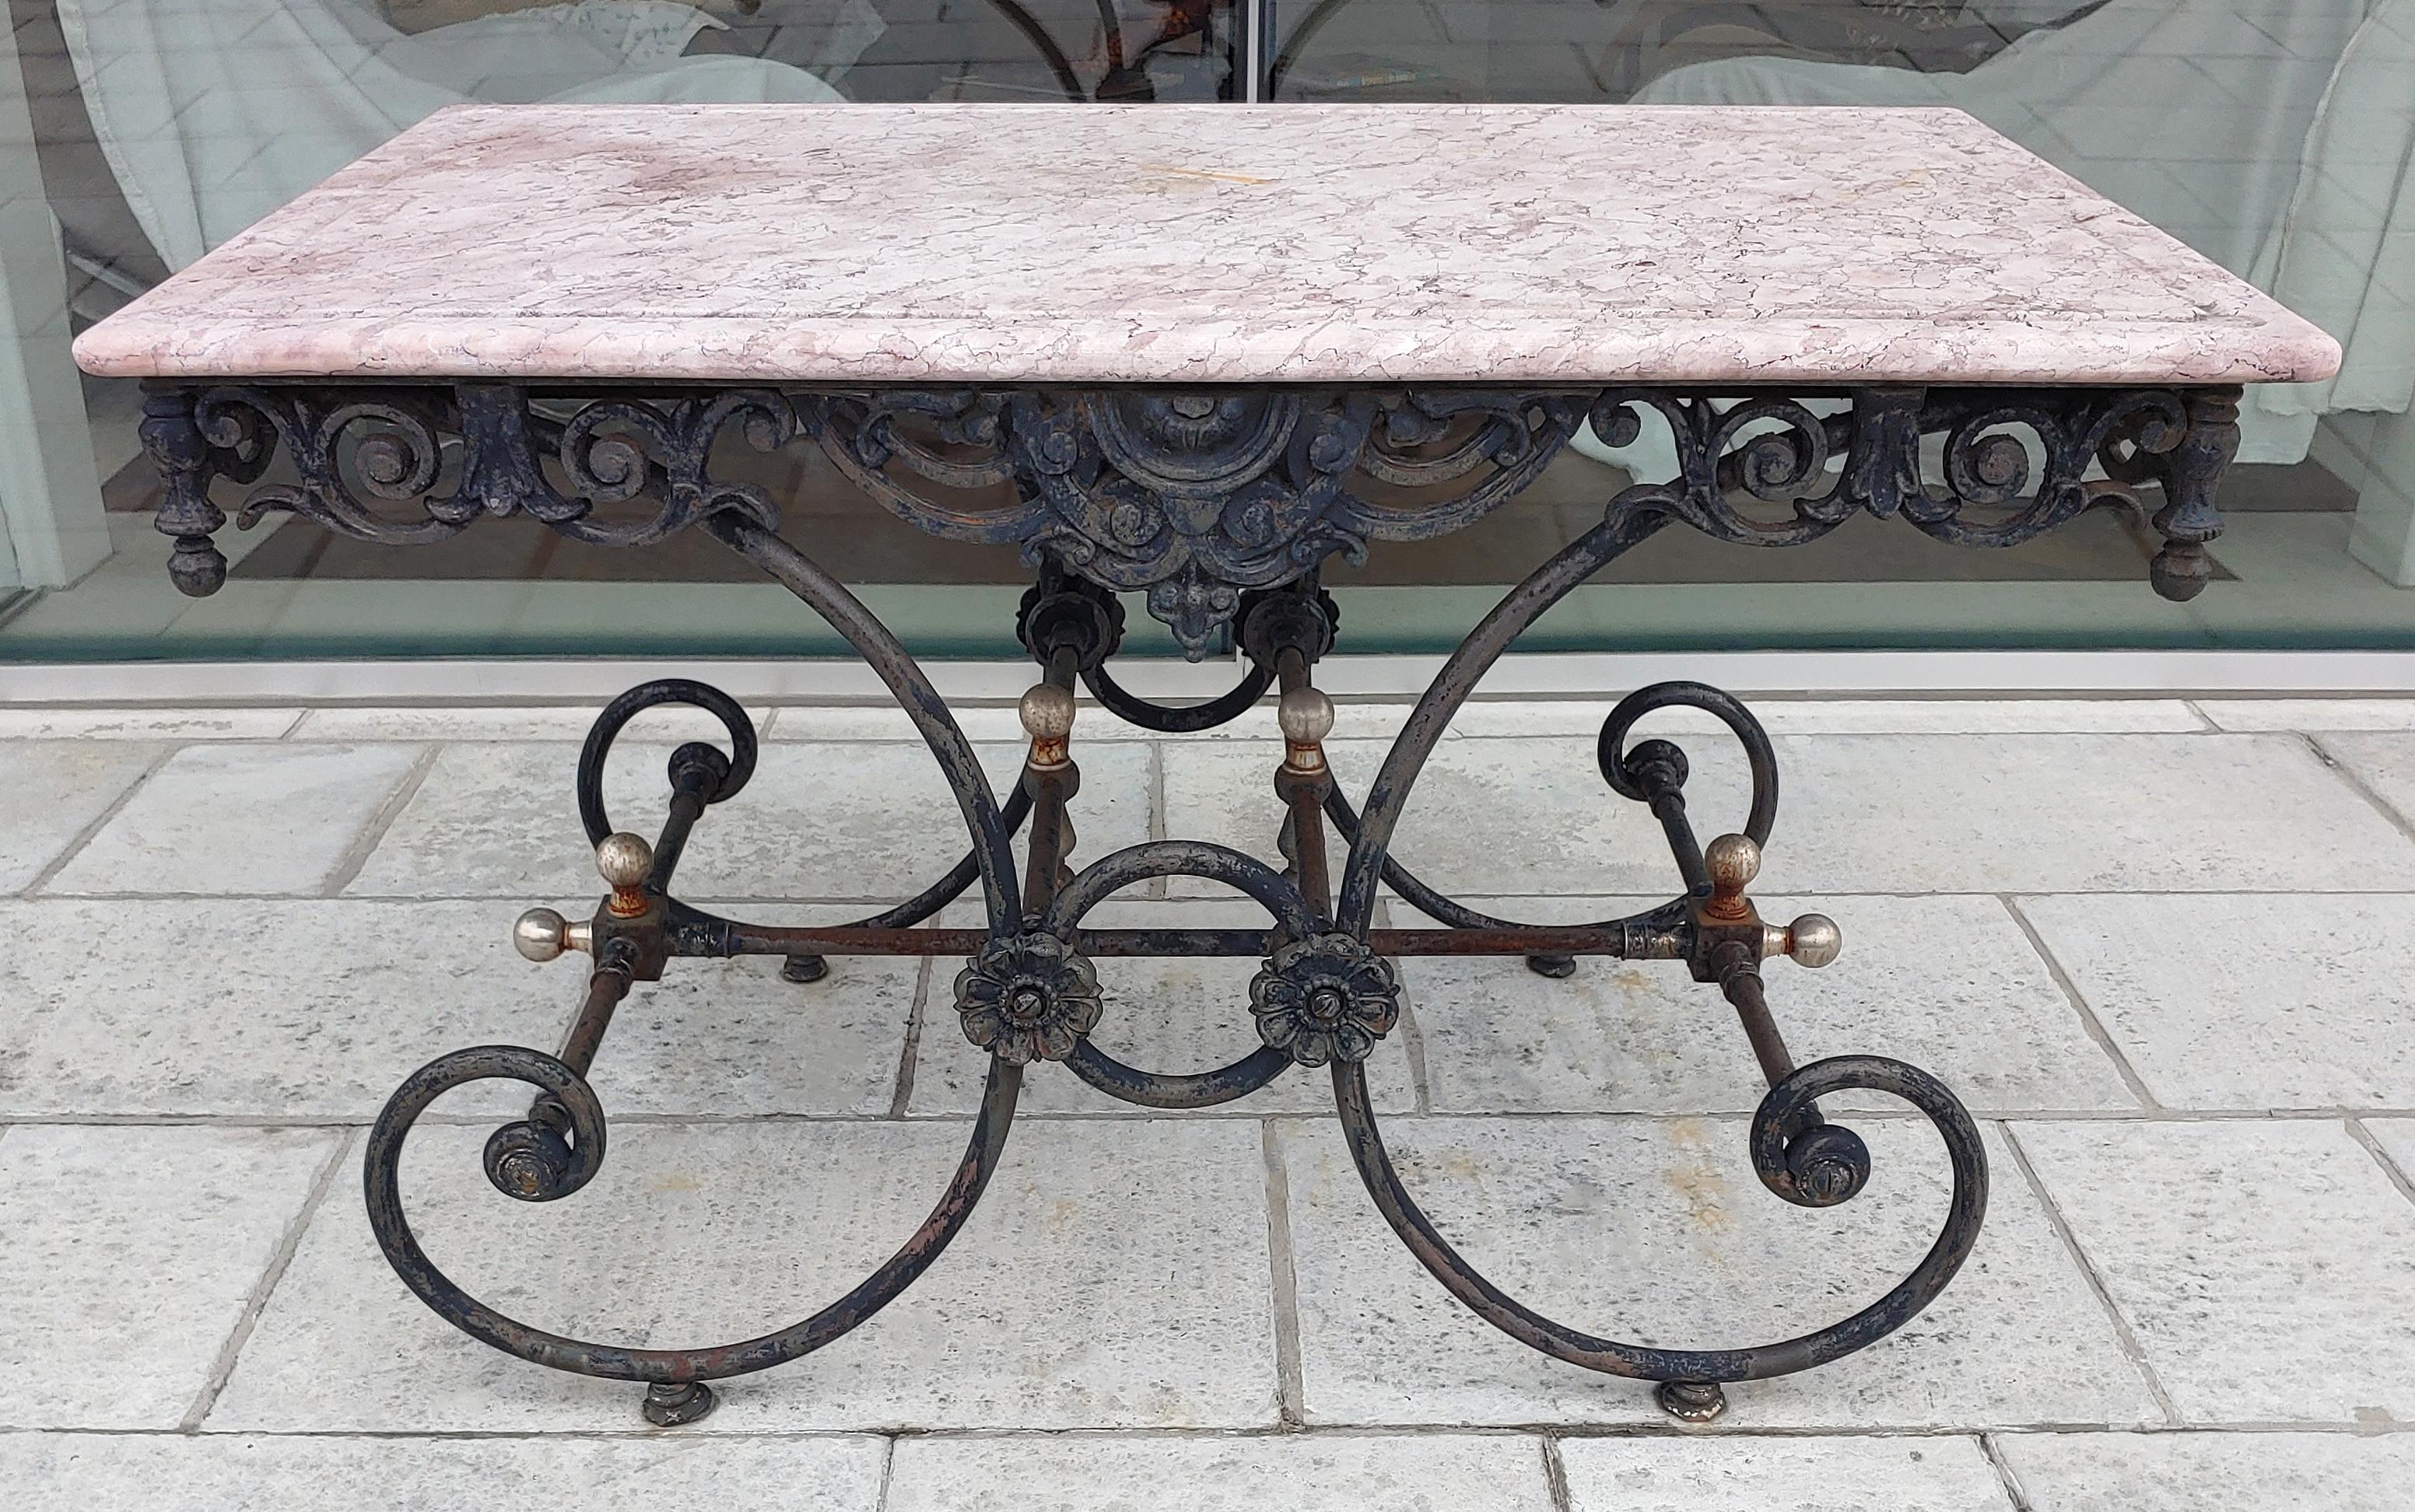 For your consideration is a lovely, antique French style wrought iron, indoor outdoor bistro table, with a pink stone top. In very good vintage condition. The dimensions are 48.25